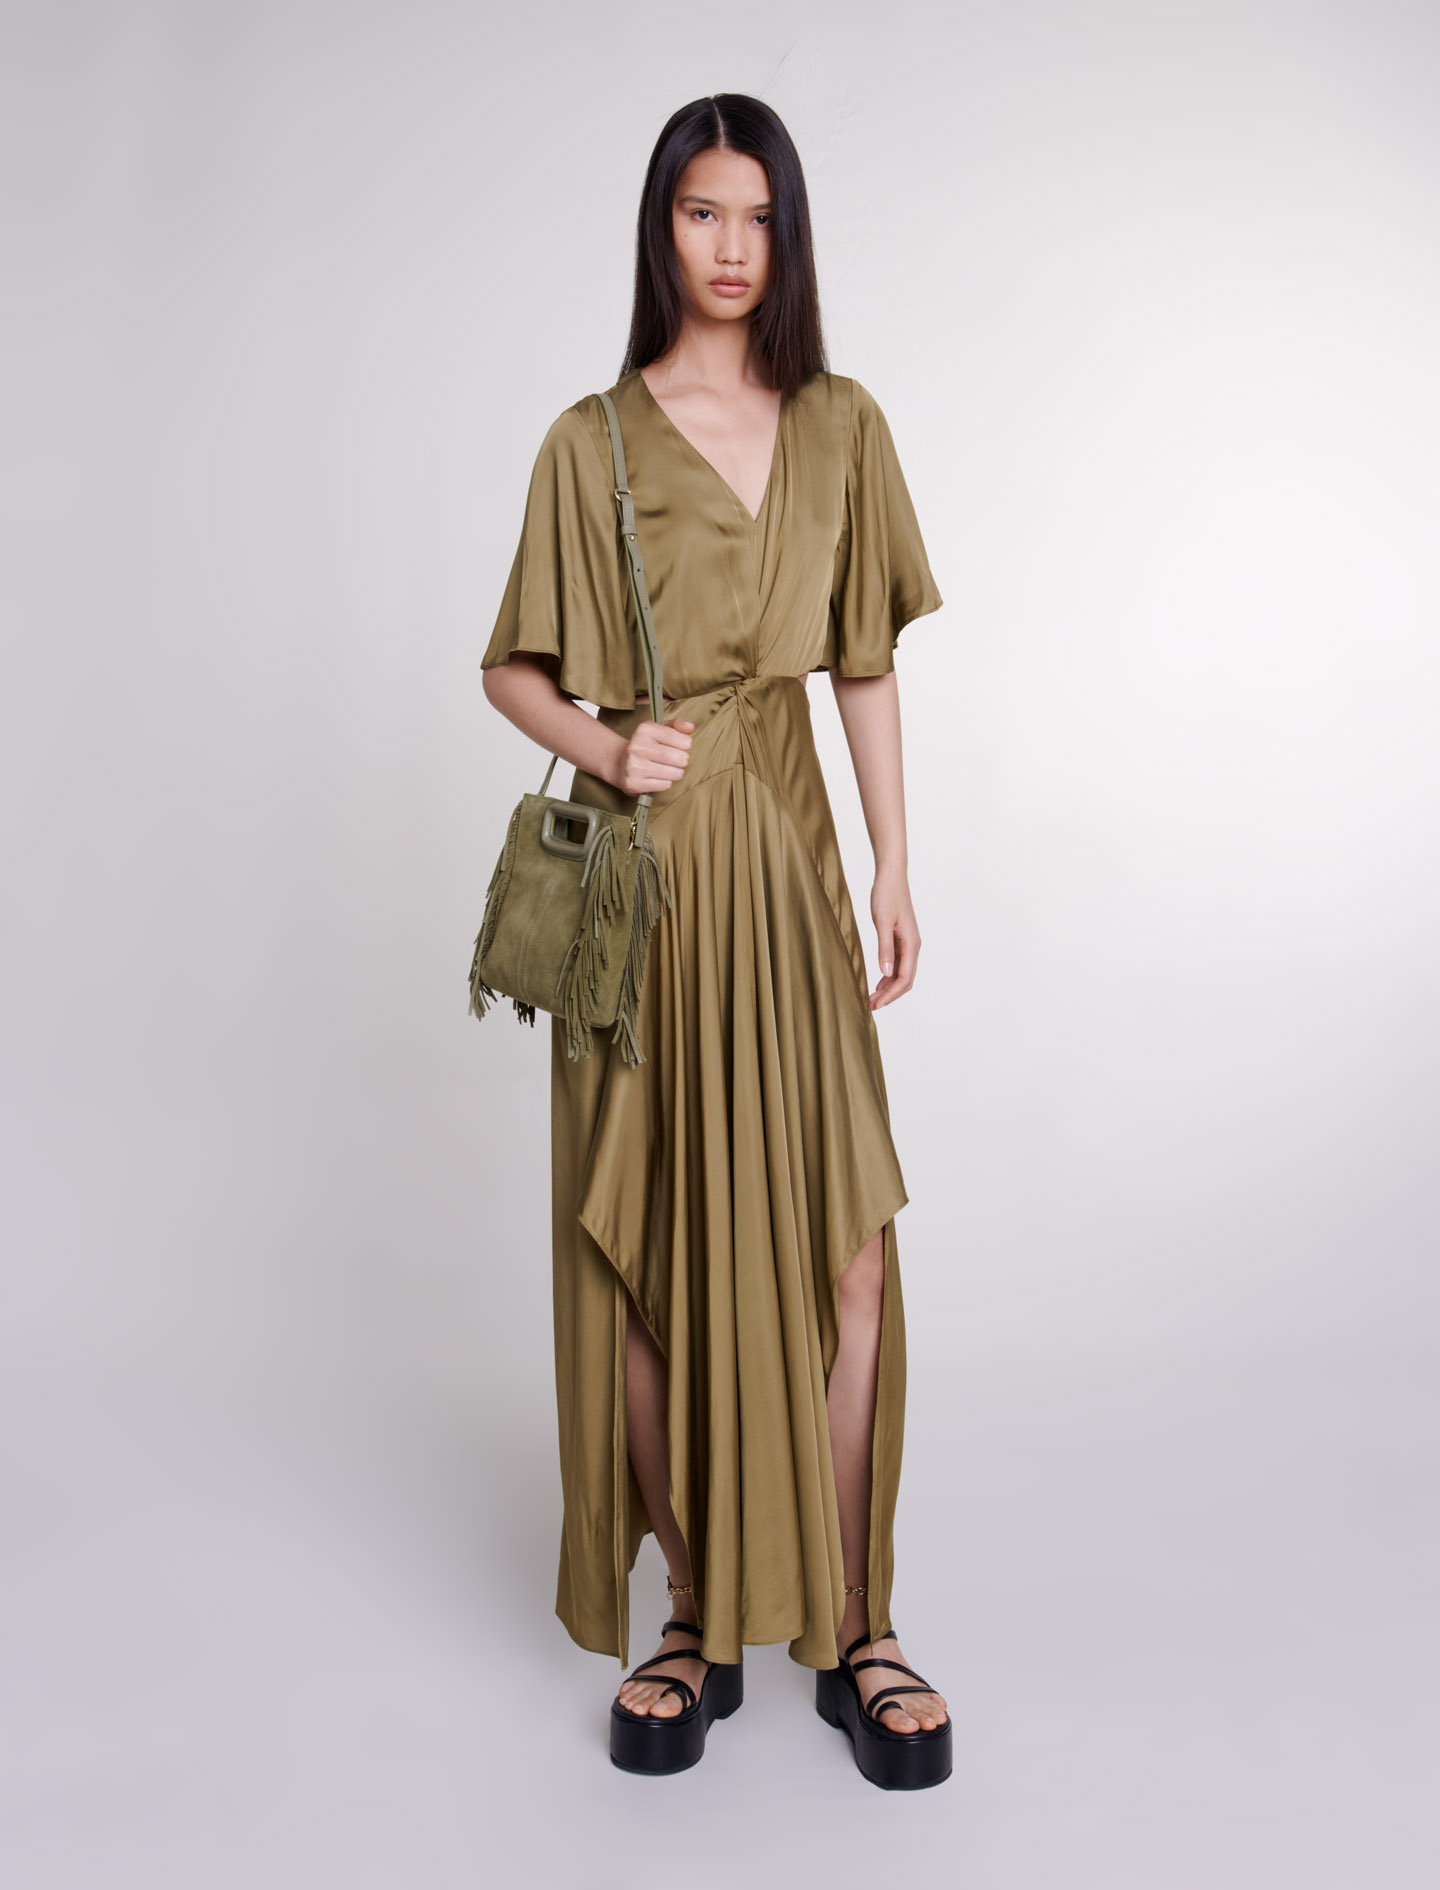 Maje Woman's viscose Lining: Openwork satin-effect maxi dress for Spring/Summer, in color Khaki / Beige